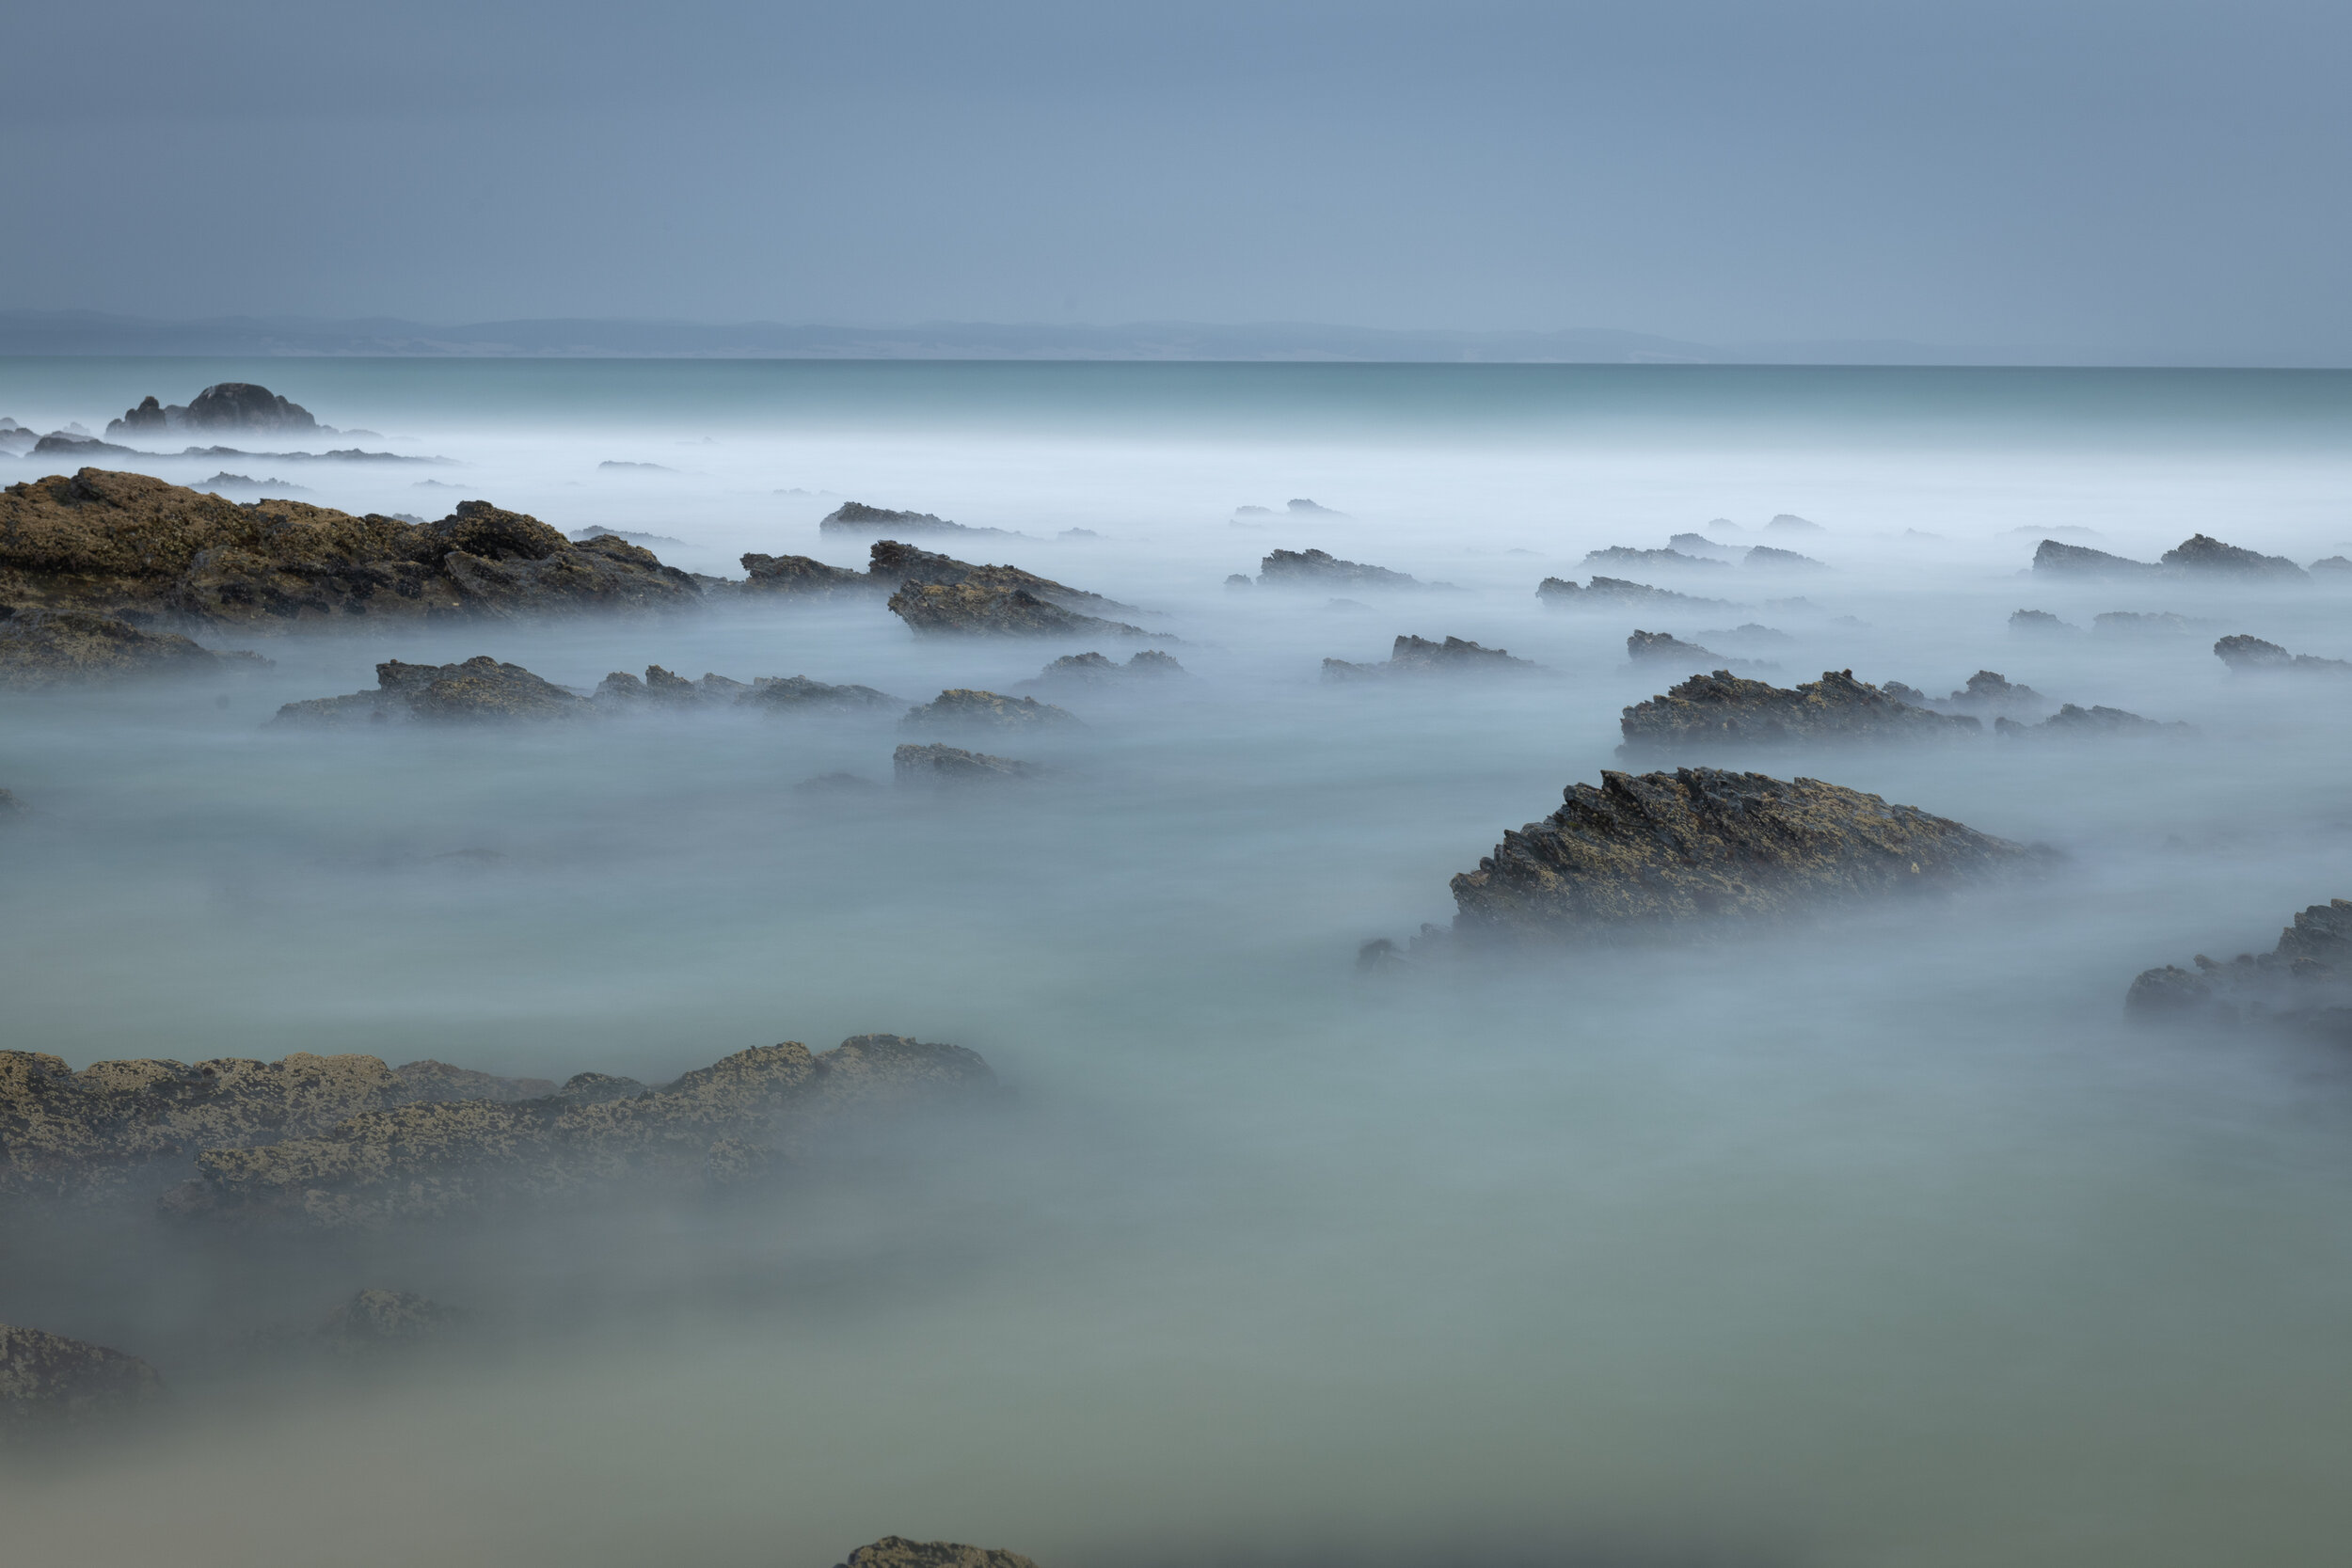  DREAM OR REALITY? Long exposure by the ocean. (South Africa) 